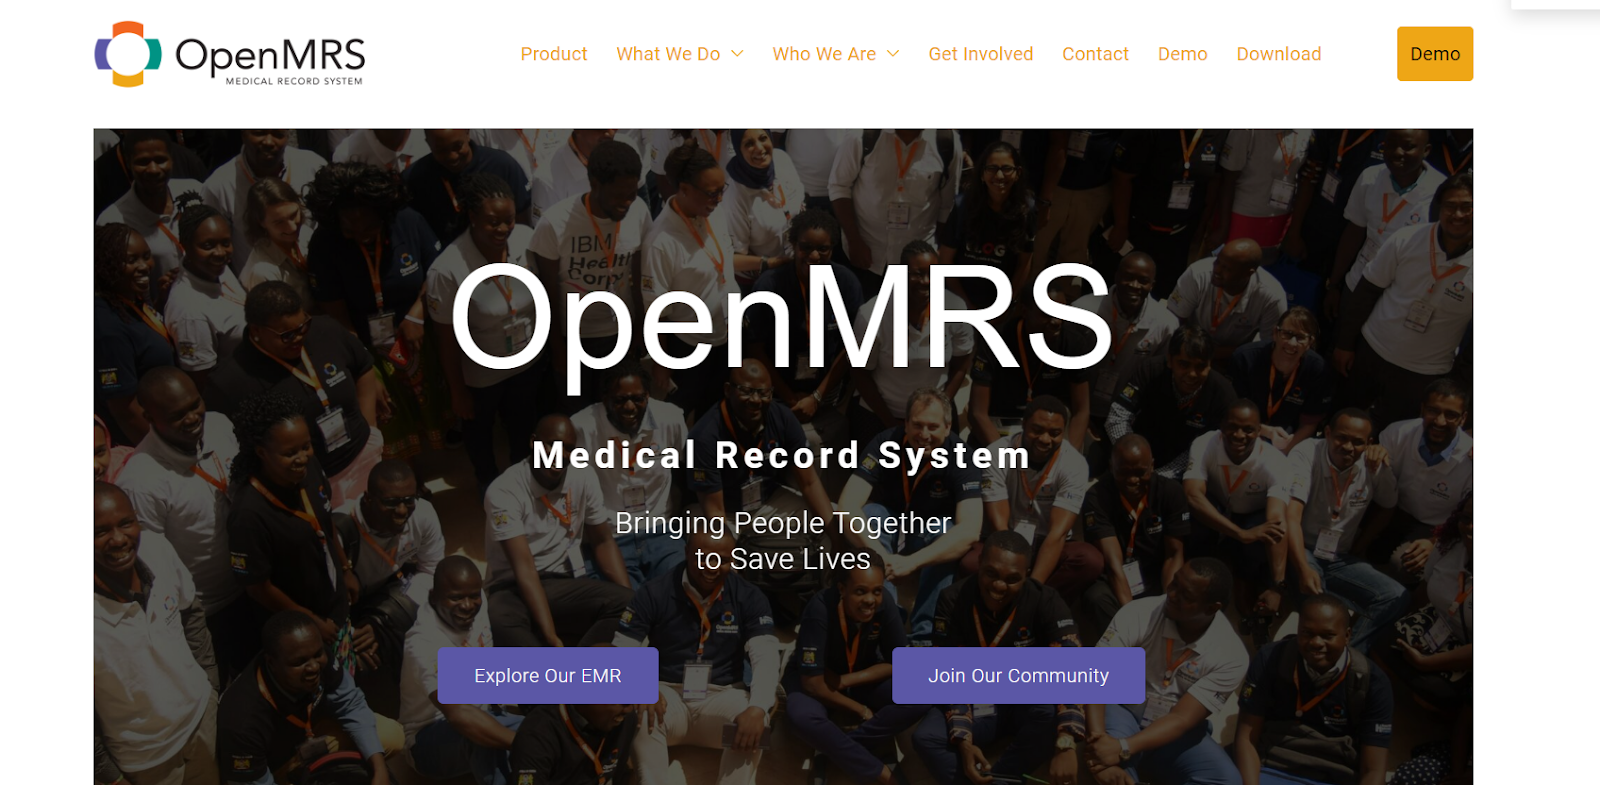 OpenMRS (Open Medical Record System): 